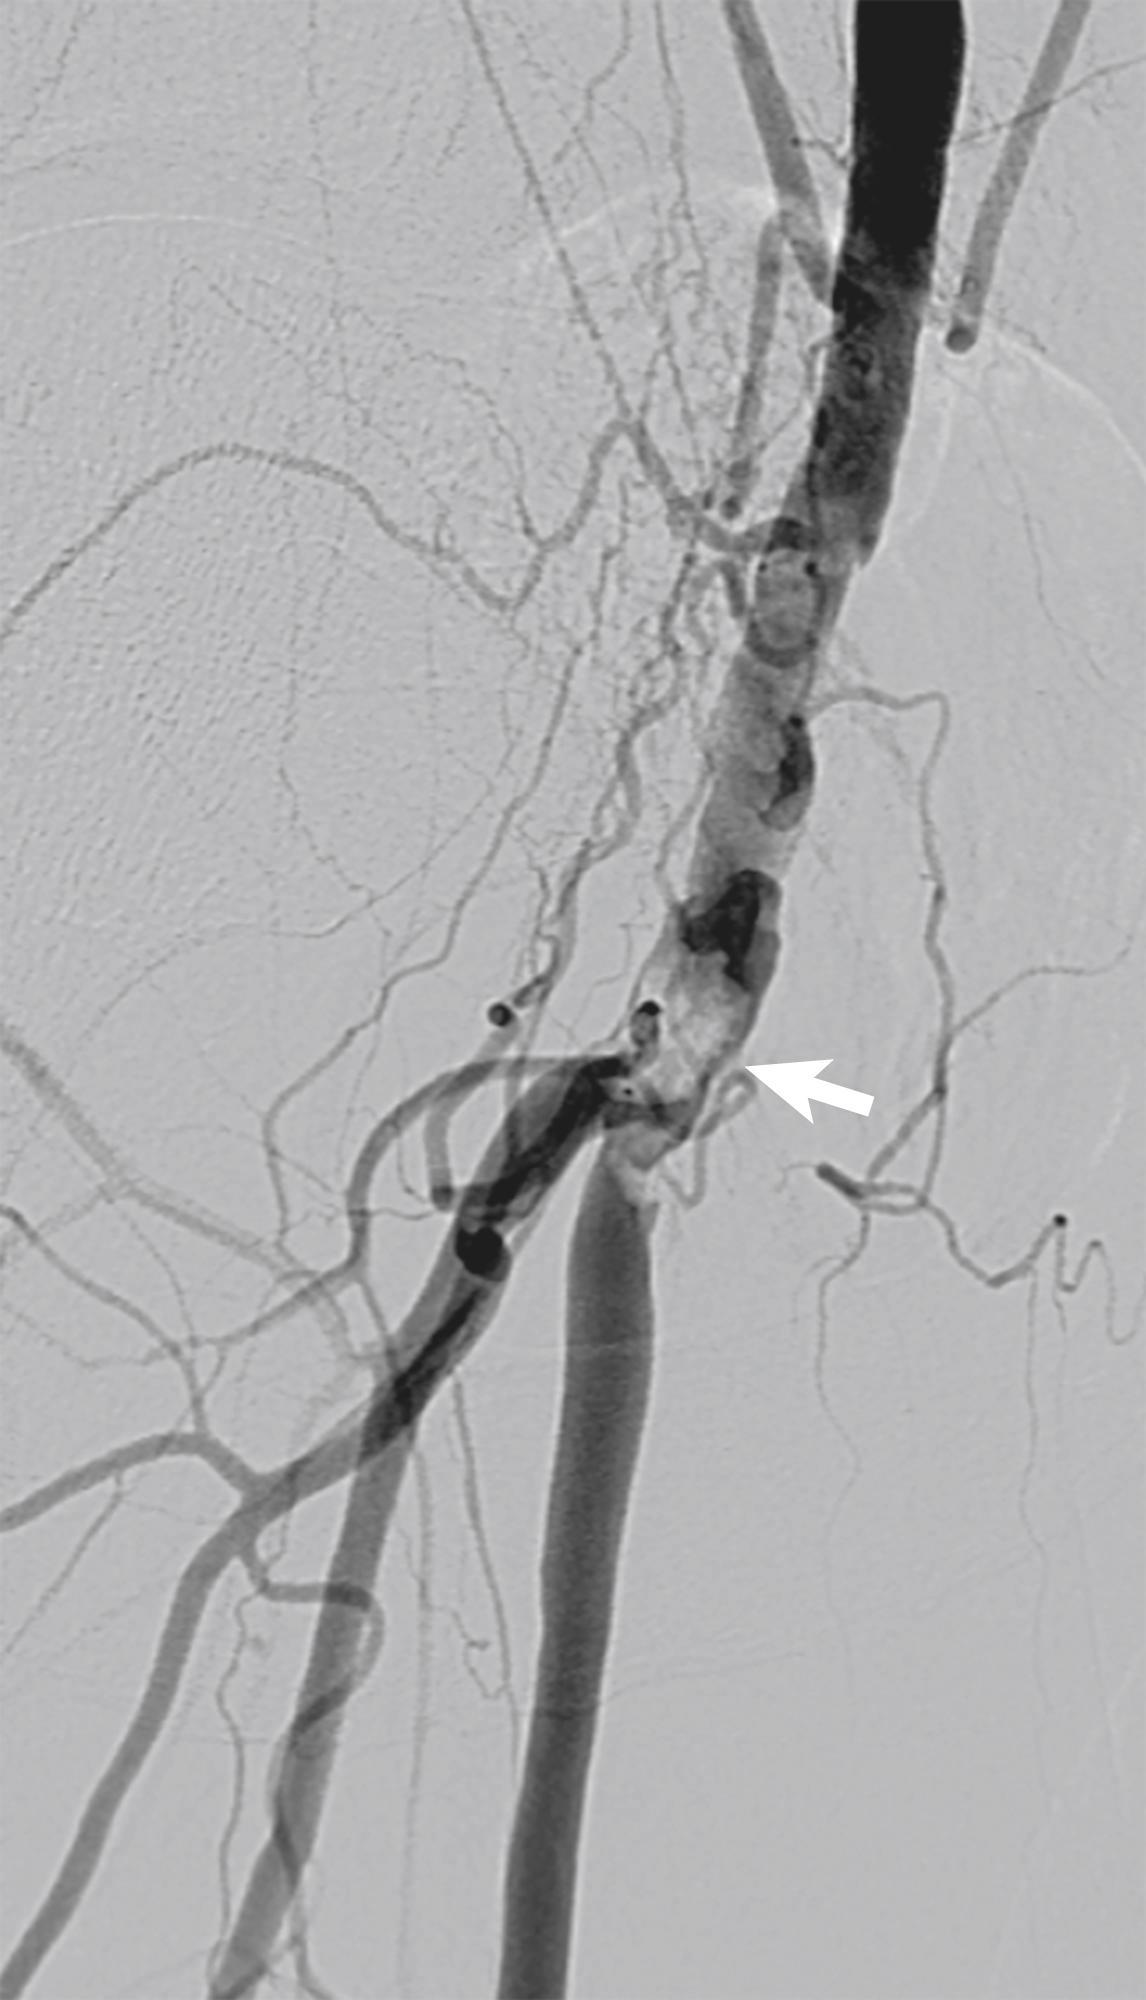 Figure 4.5, Typically, atherosclerotic disease found in the common femoral artery is calcified and eccentric ( arrow ). It frequently involves the origins of both superficial femoral and profunda femoris arteries, making femoral endarterectomy preferable to percutaneous transluminal angioplasty and stent implantation.